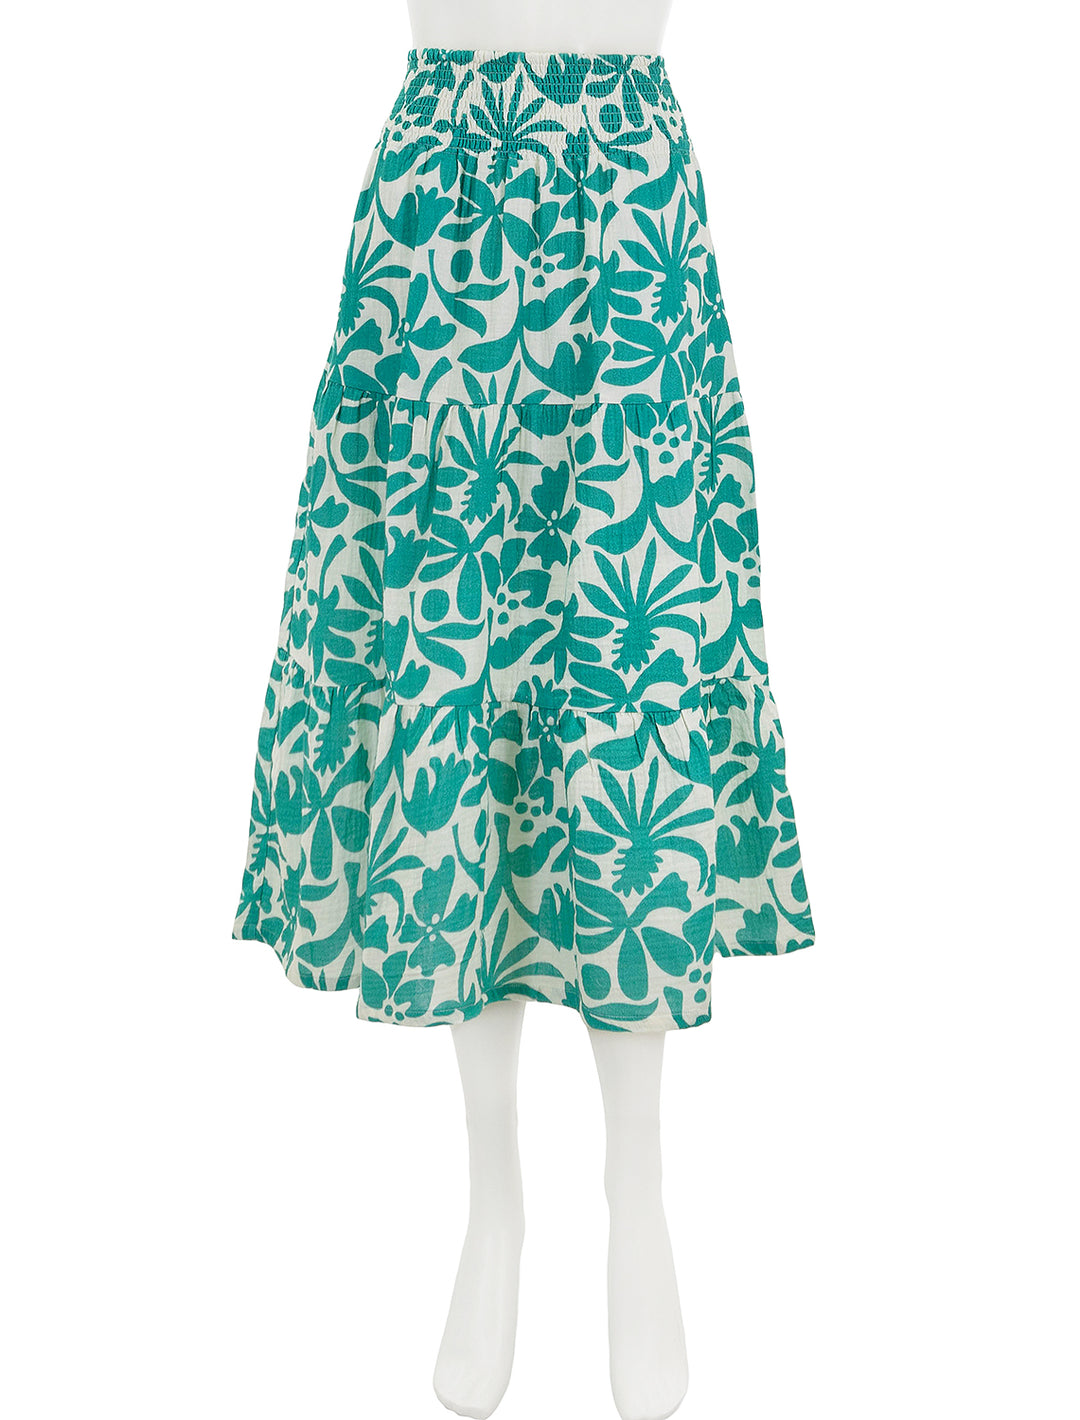 Front view of Marine Layer's corinne double cloth maxi skirt in spruce flora.